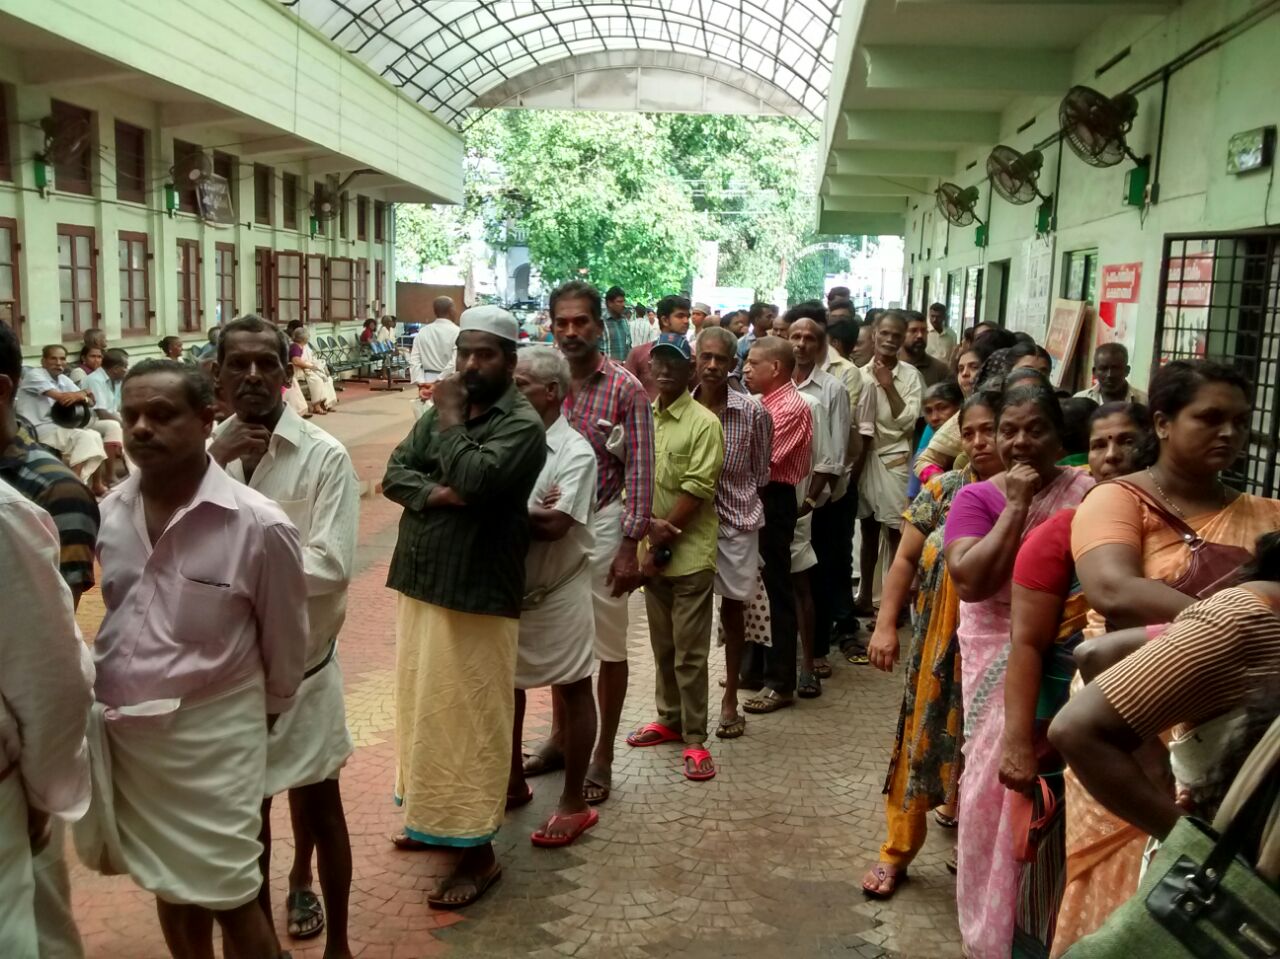 All India Radio News on Twitter: "#MonsoonFever : Patients queuing up in front of special #fever clinic at General #Hospital #Kollam, #Kerala https://t.co/TXvgGd7mc2" / Twitter